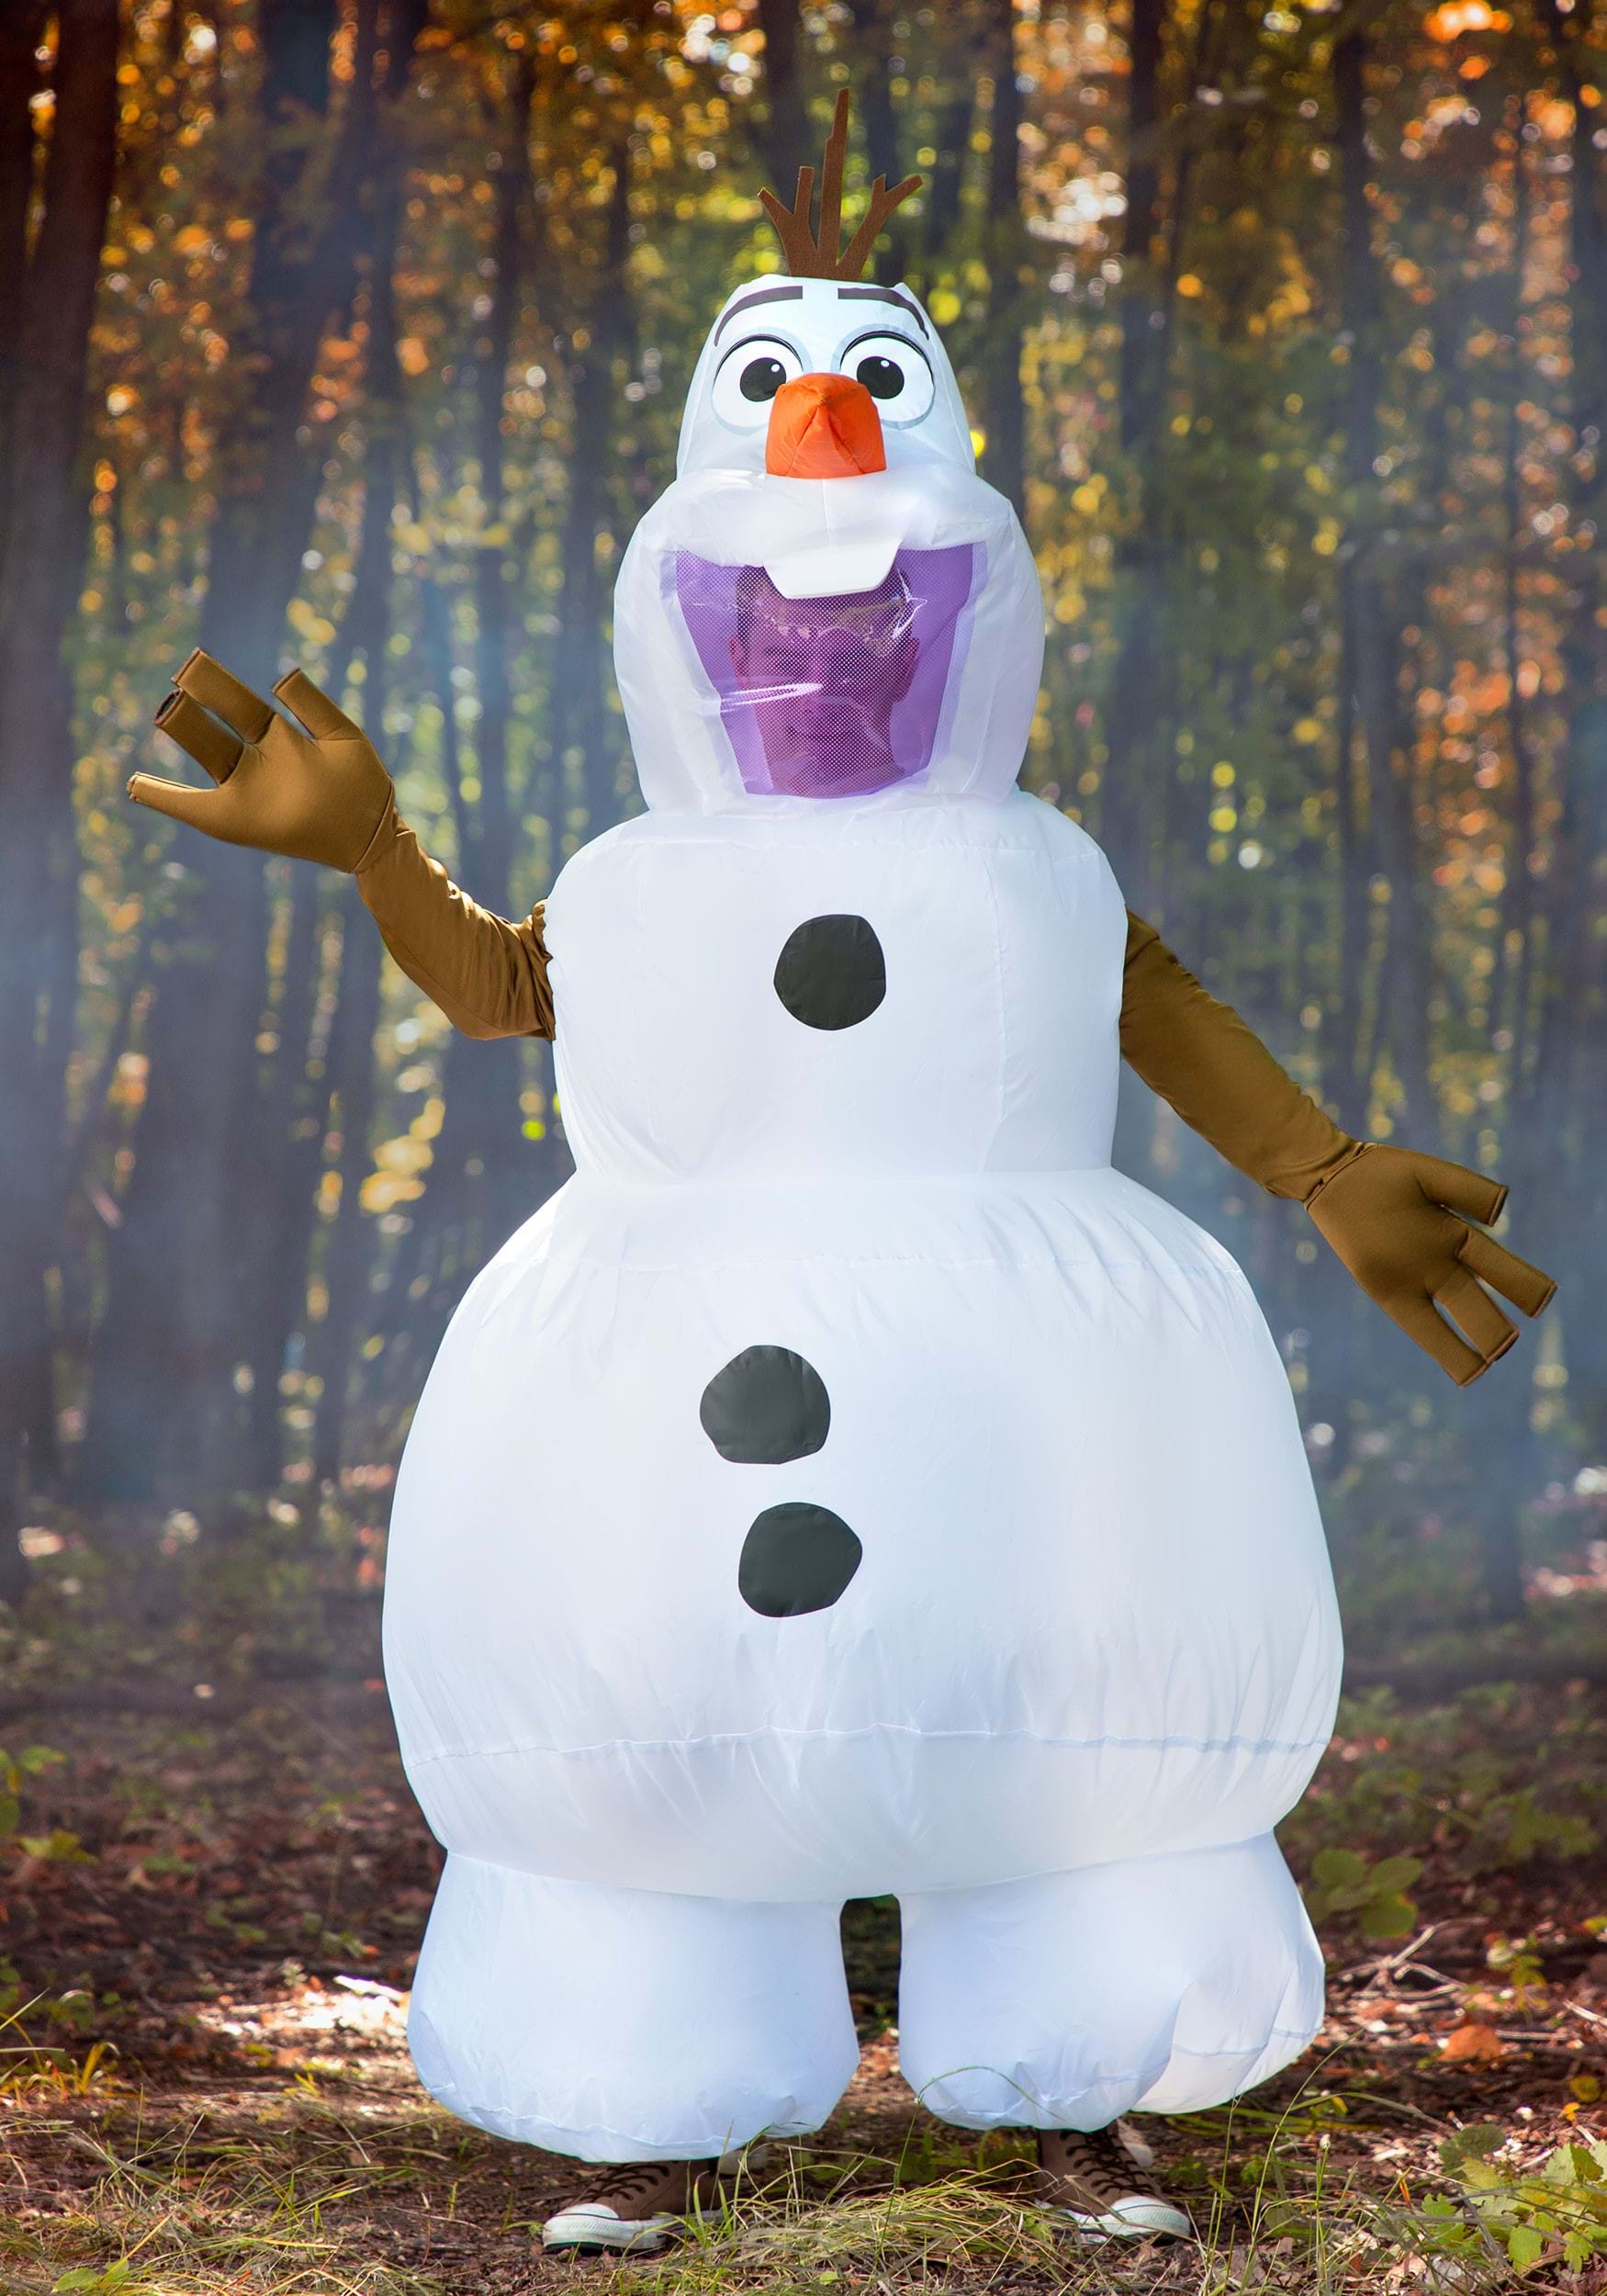 https://images.halloween.com/products/74072/1-1/frozen-adult-olaf-inflatable-costume2.jpg